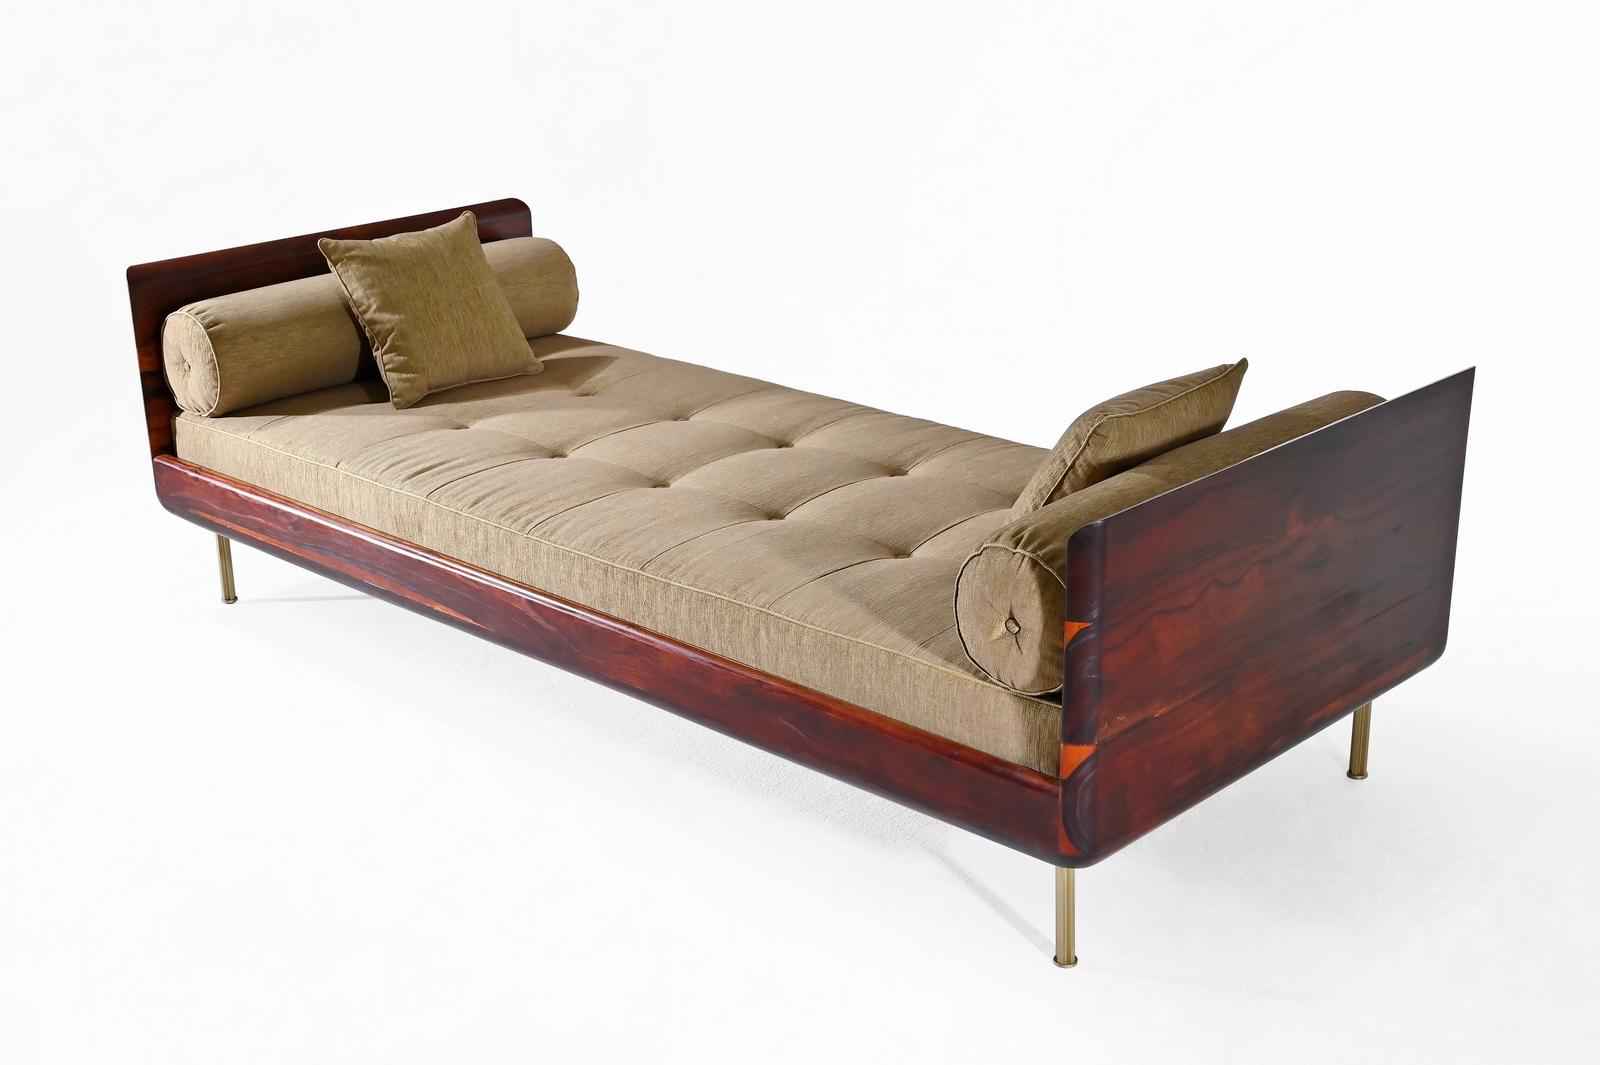 Introducing the all-new 'EleganceRest' daybed model, a remarkable addition to our diverse furniture collection. Crafted for both comfort and style, this daybed redefines relaxation. The frame is meticulously constructed from reclaimed Chin Chan